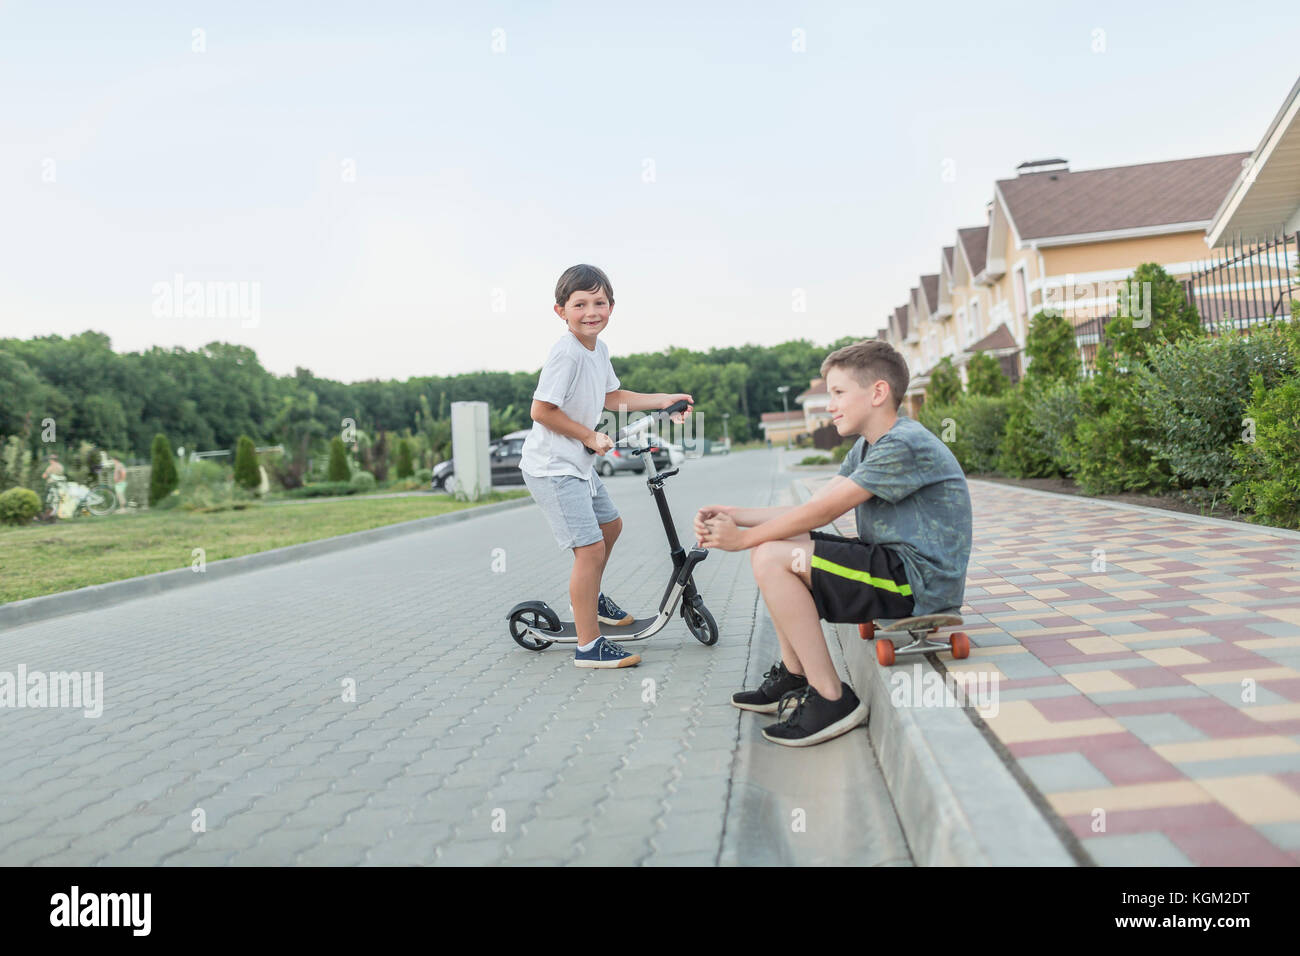 Boy sitting on skateboard while brother riding push scooter on cobbled street Stock Photo